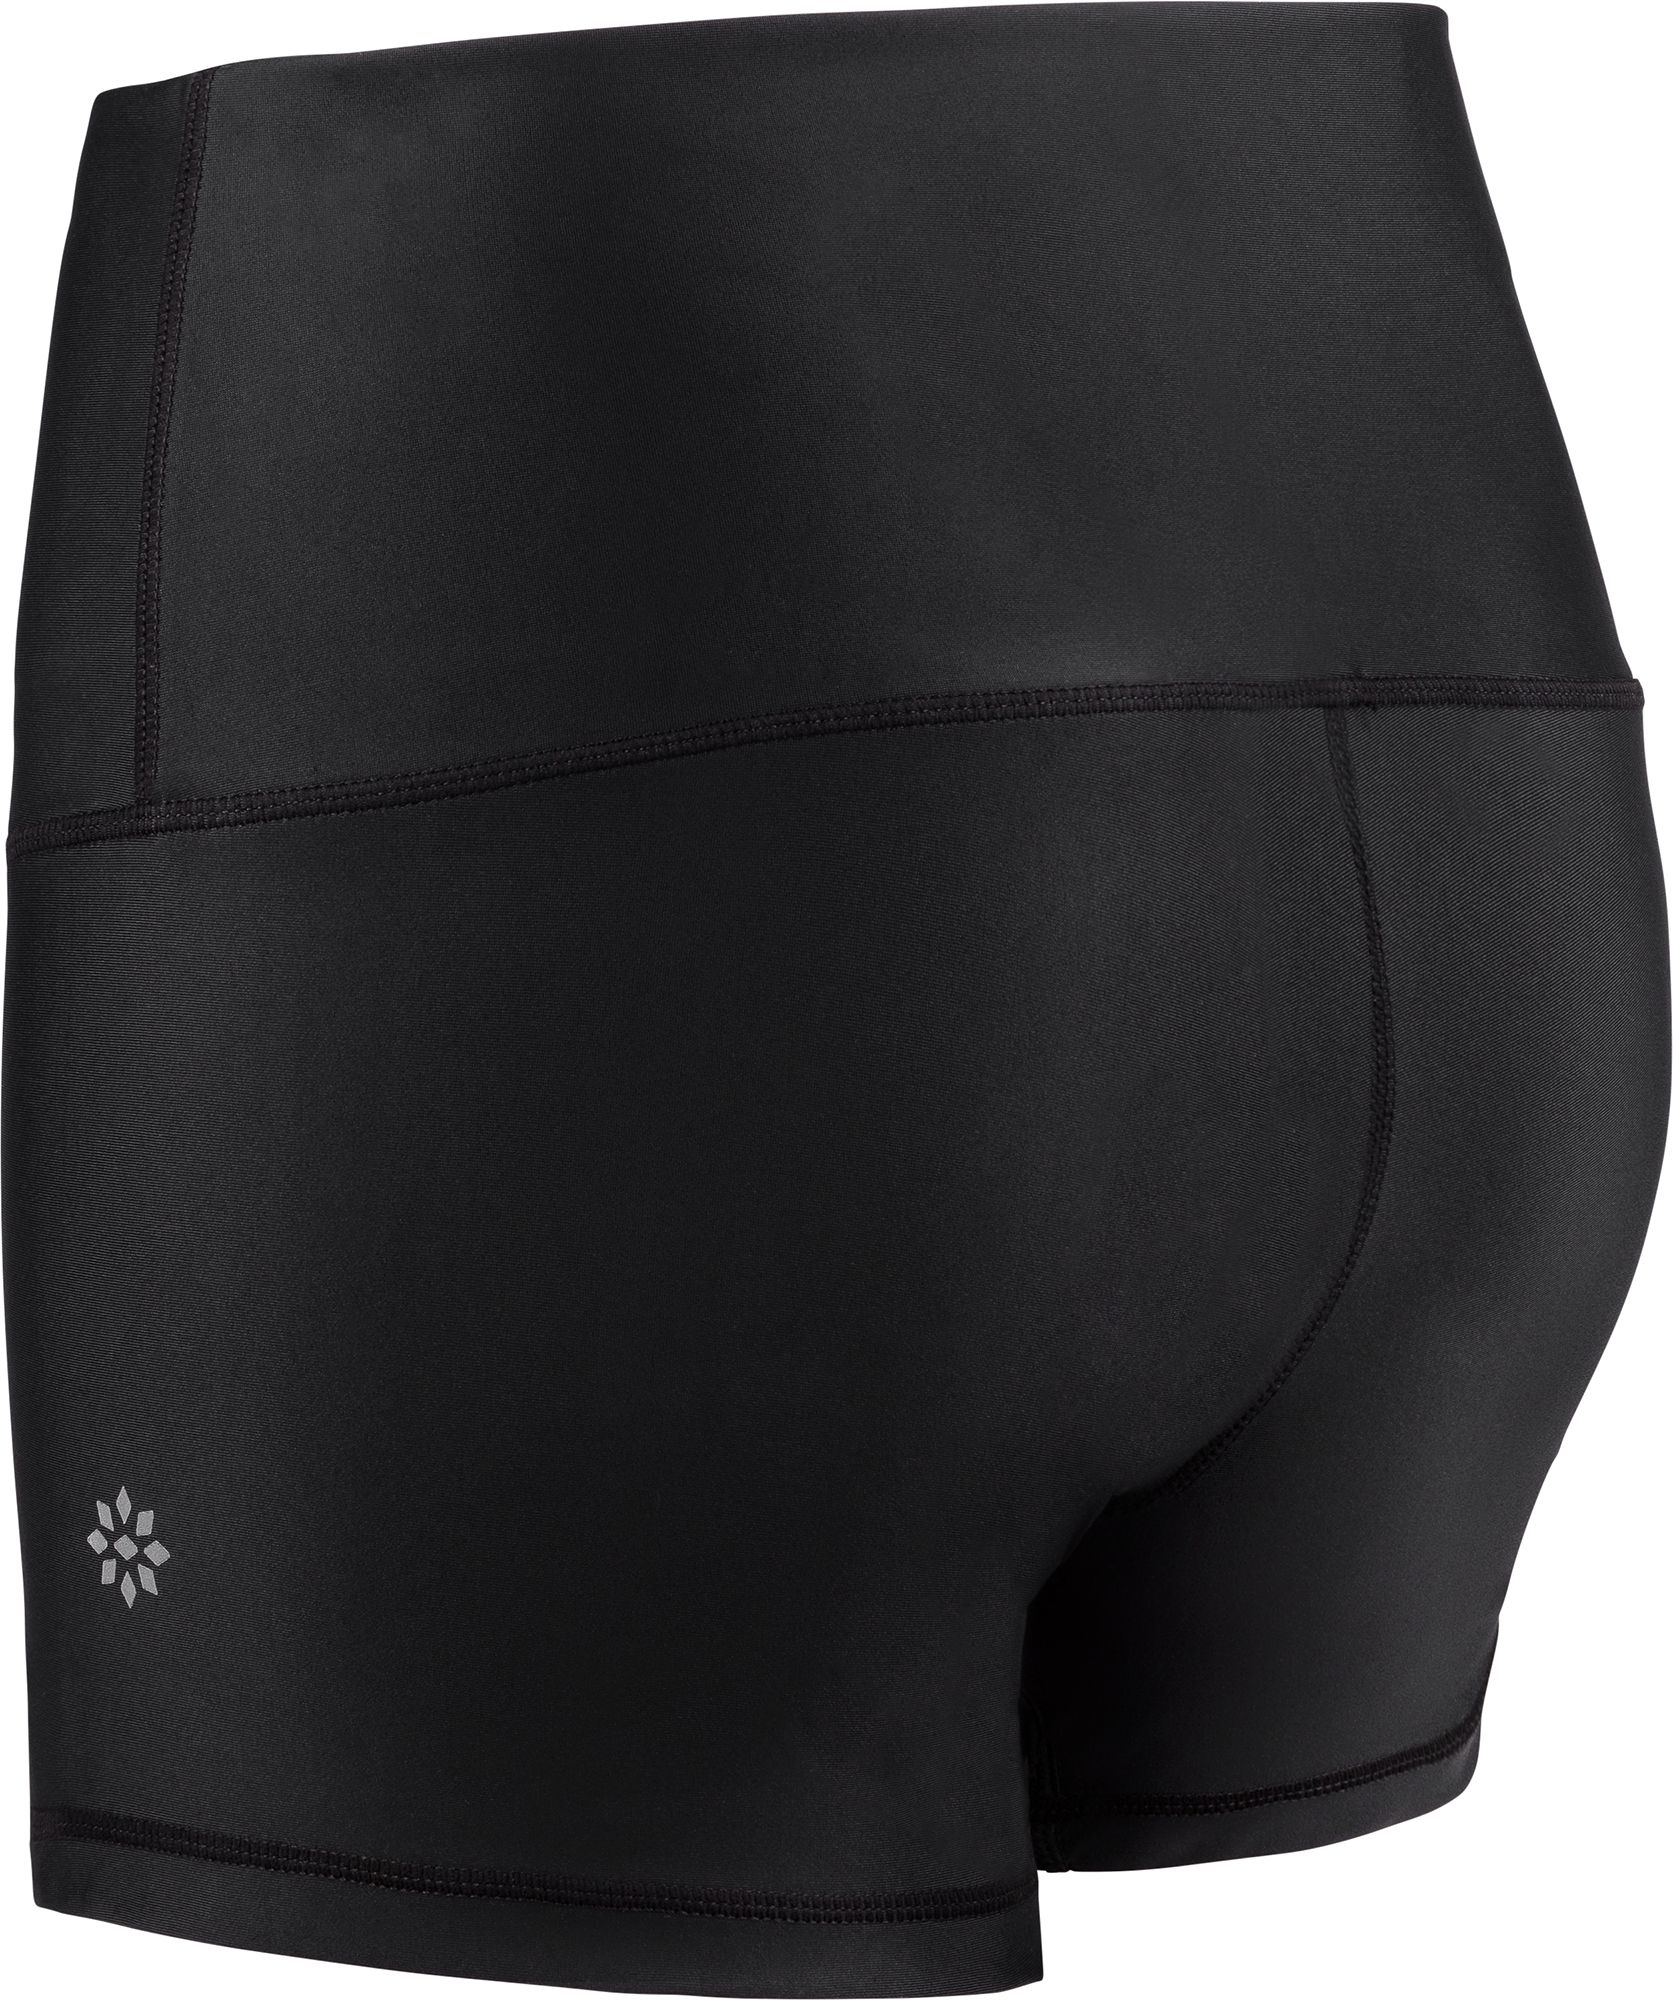 RIP-IT Women's Volleyball Shorts